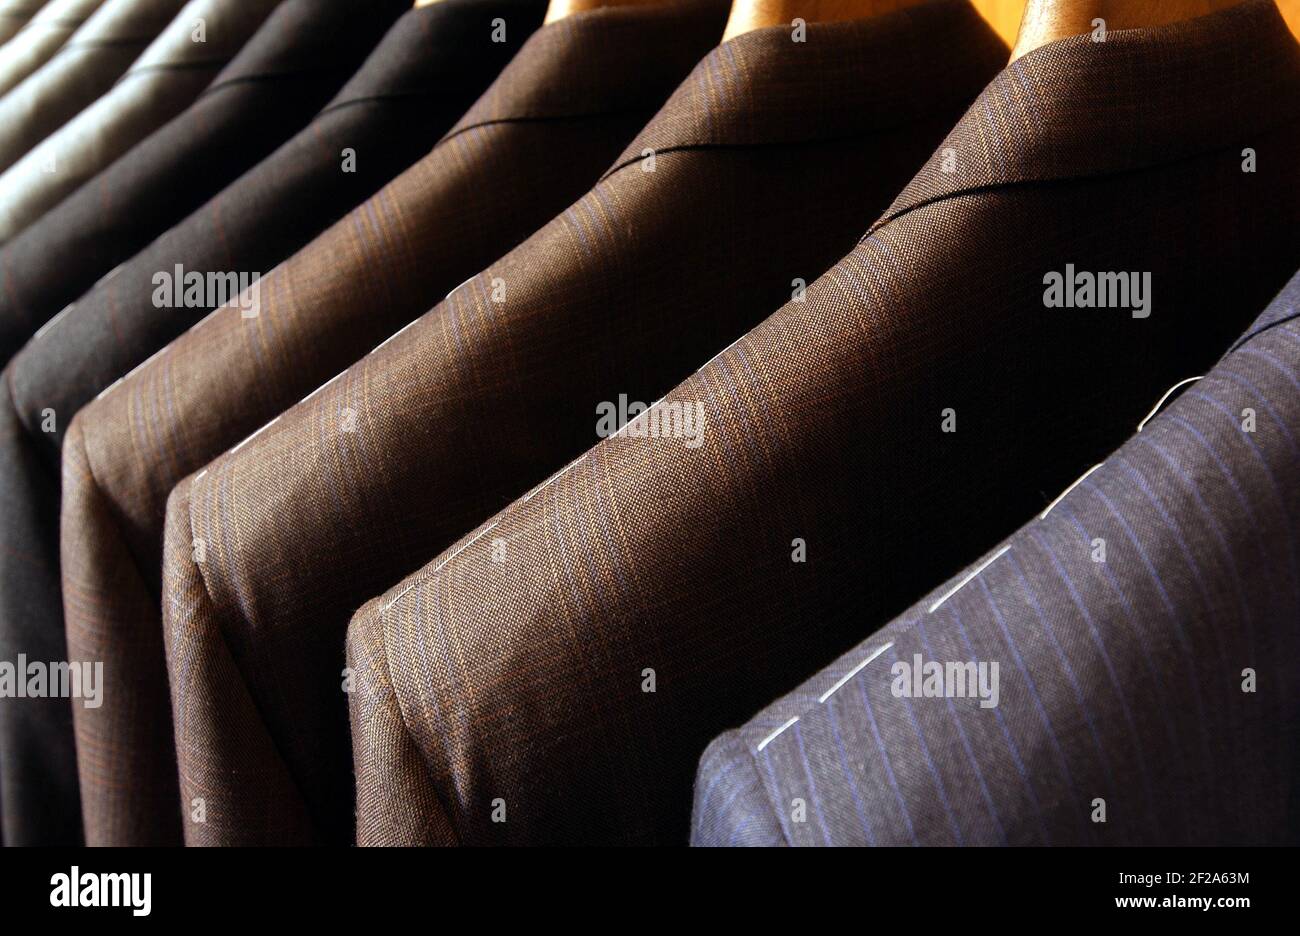 Close up of suit jackets for sale on a clothes rail Stock Photo